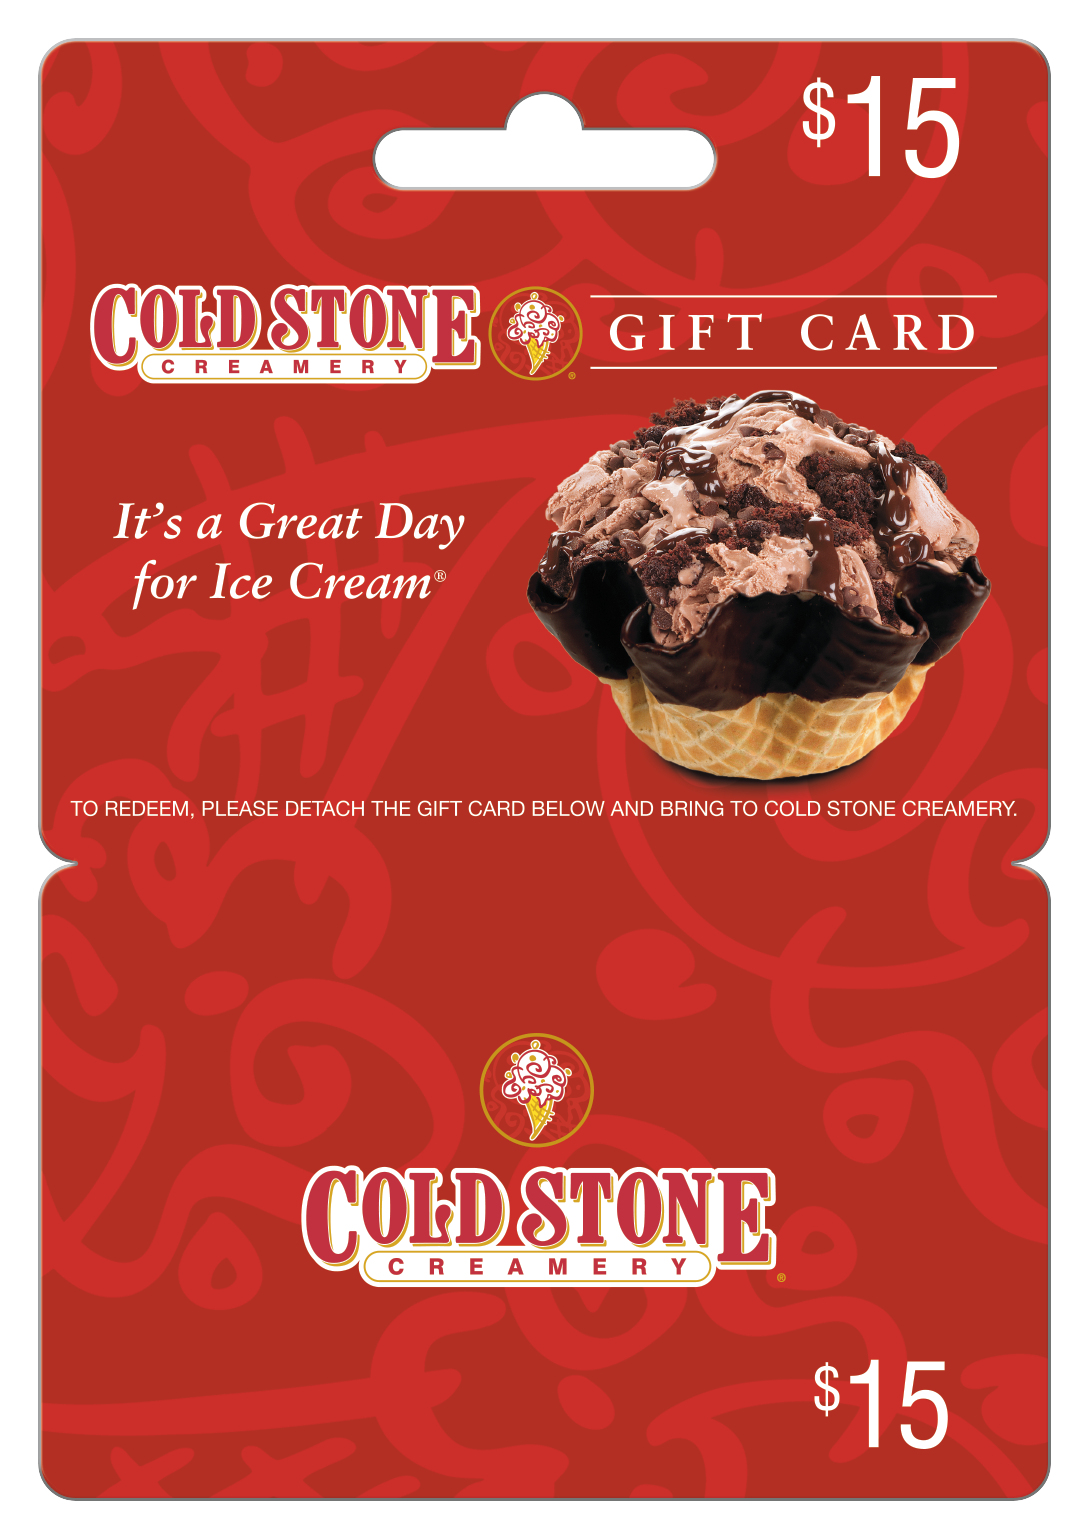 Coldstone Creamery $15 Gift Card - image 4 of 4